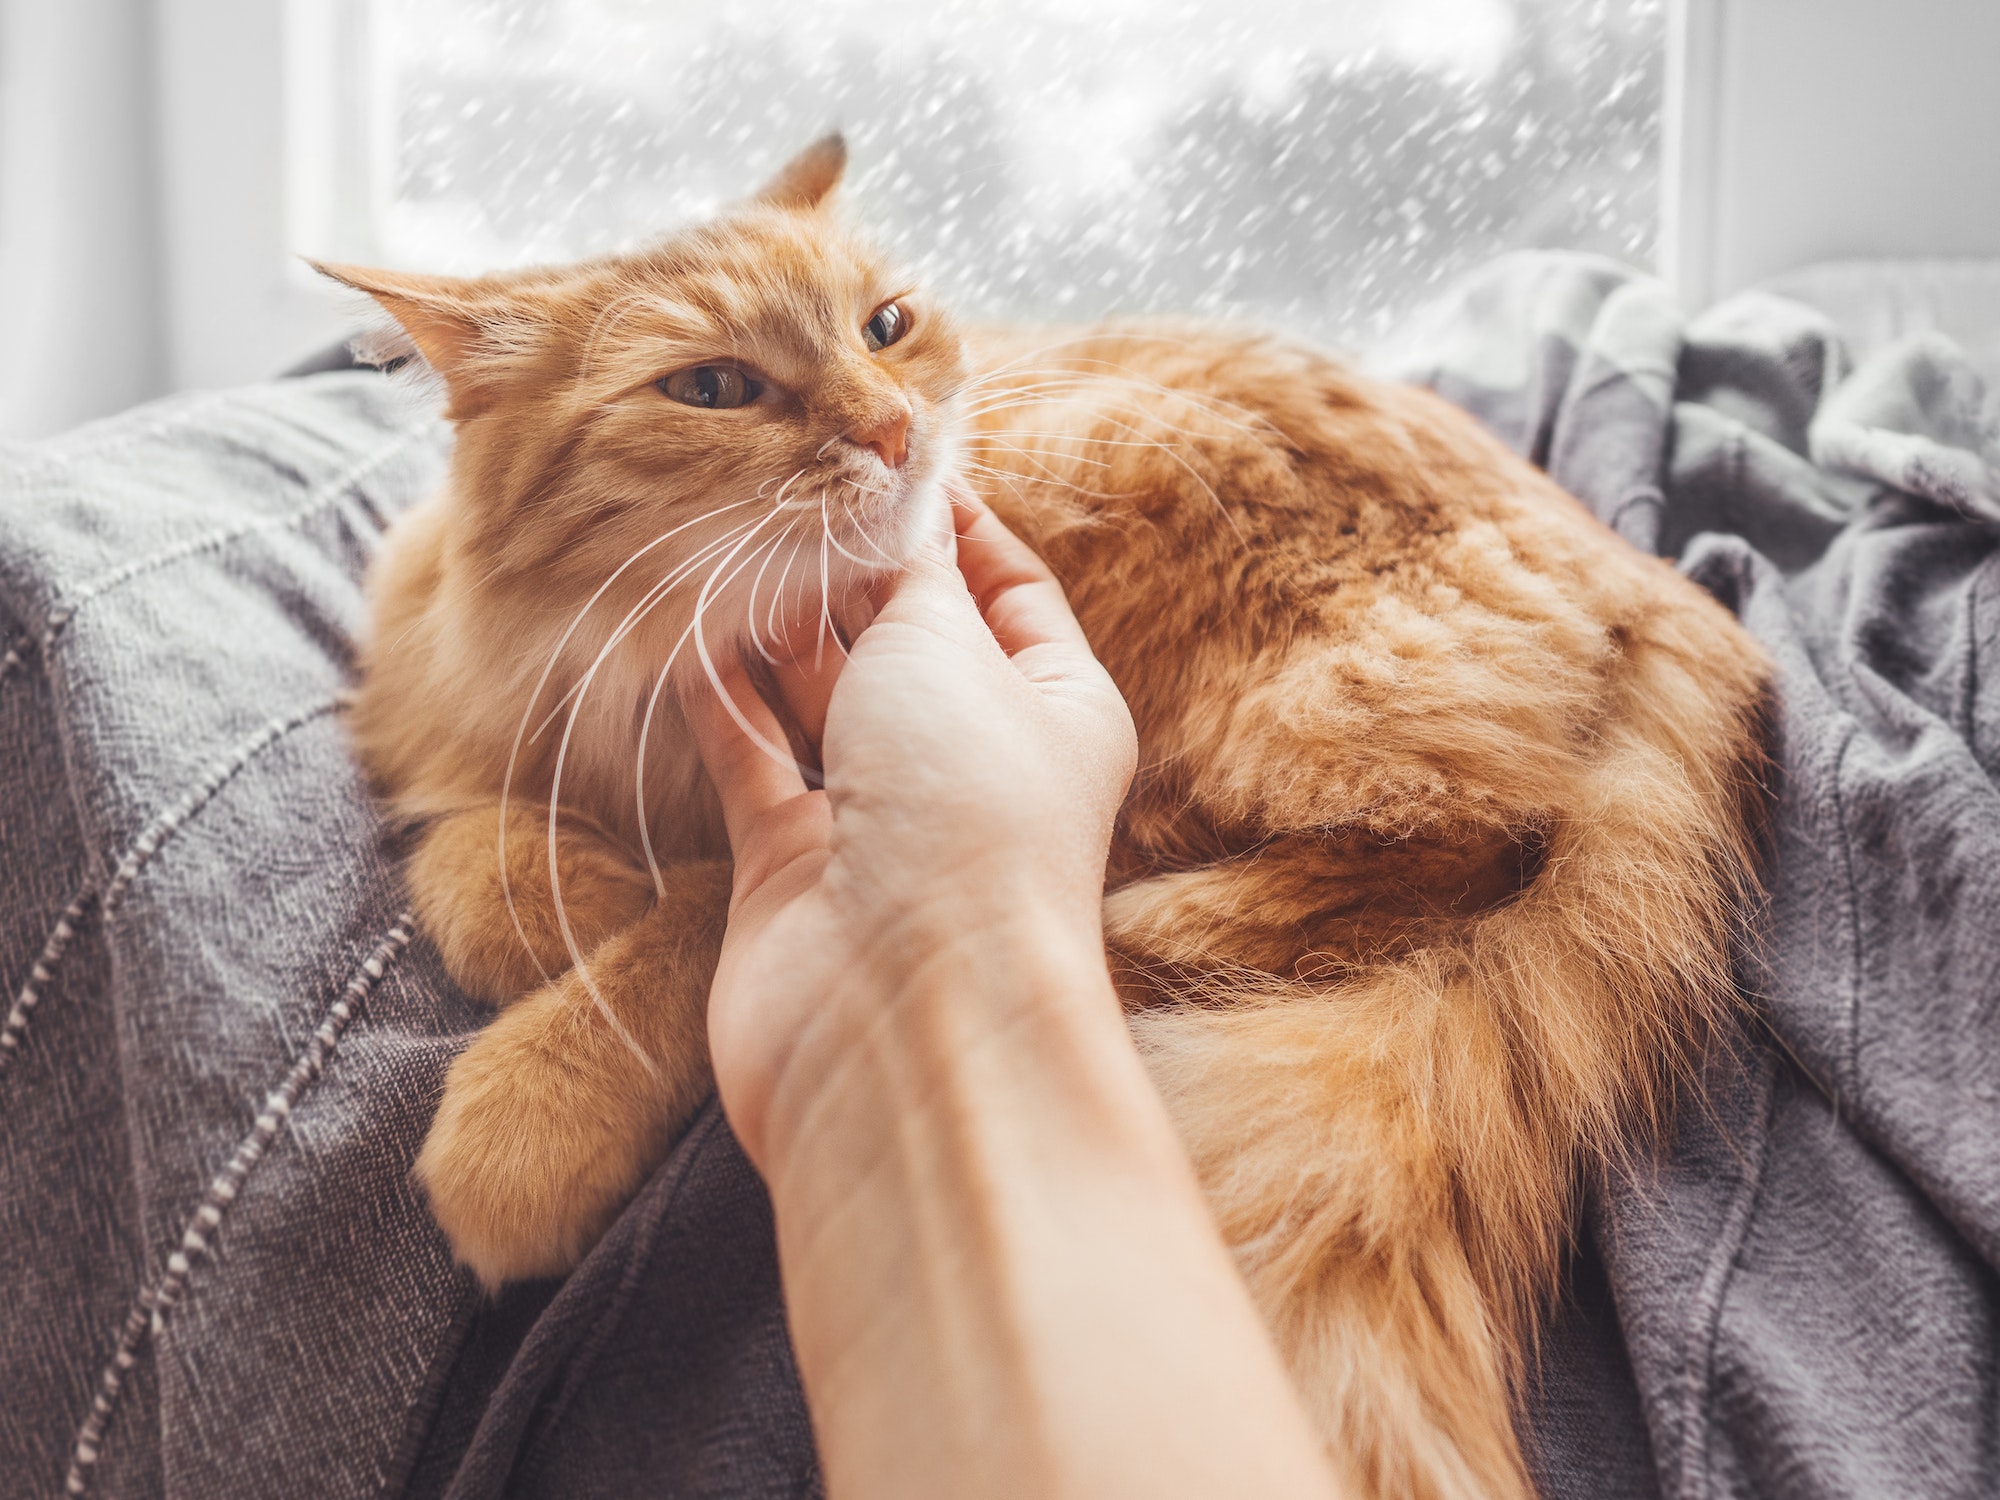 Woman strokes cute ginger cat lying on blanket on window sill. Fluffy pet purrs with pleasure.